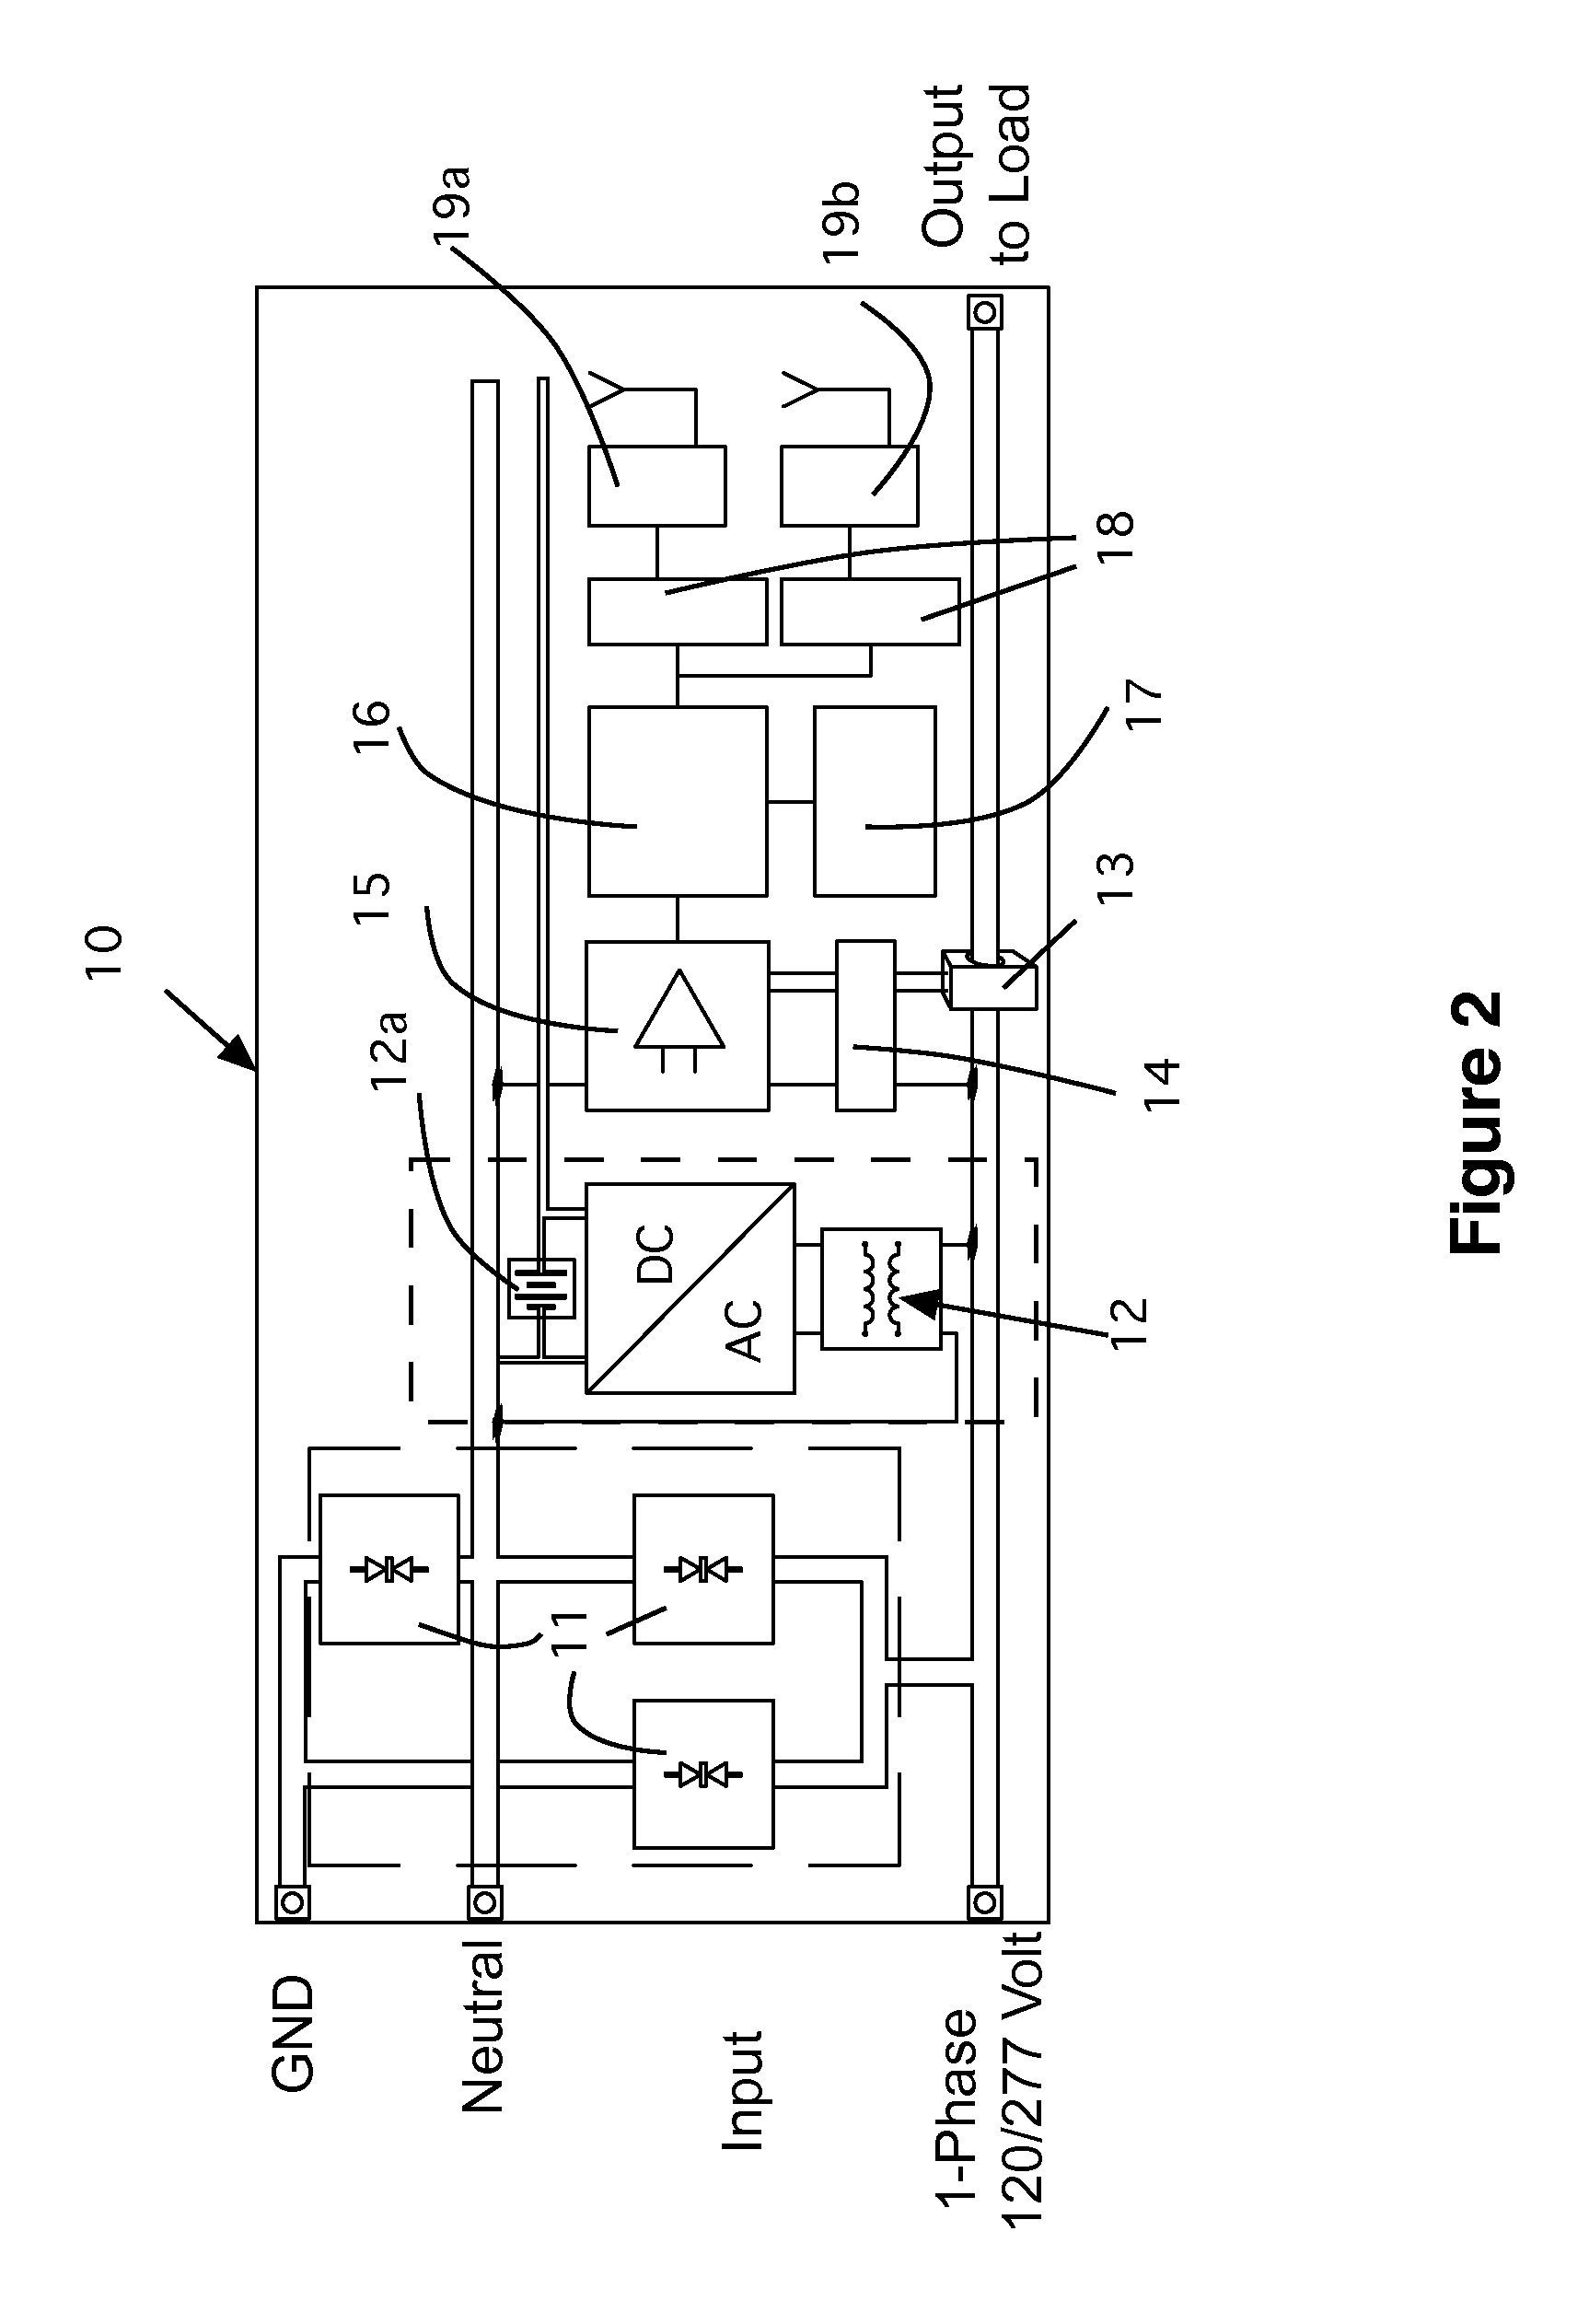 Fault prediction system for electrical distribution systems and monitored loads